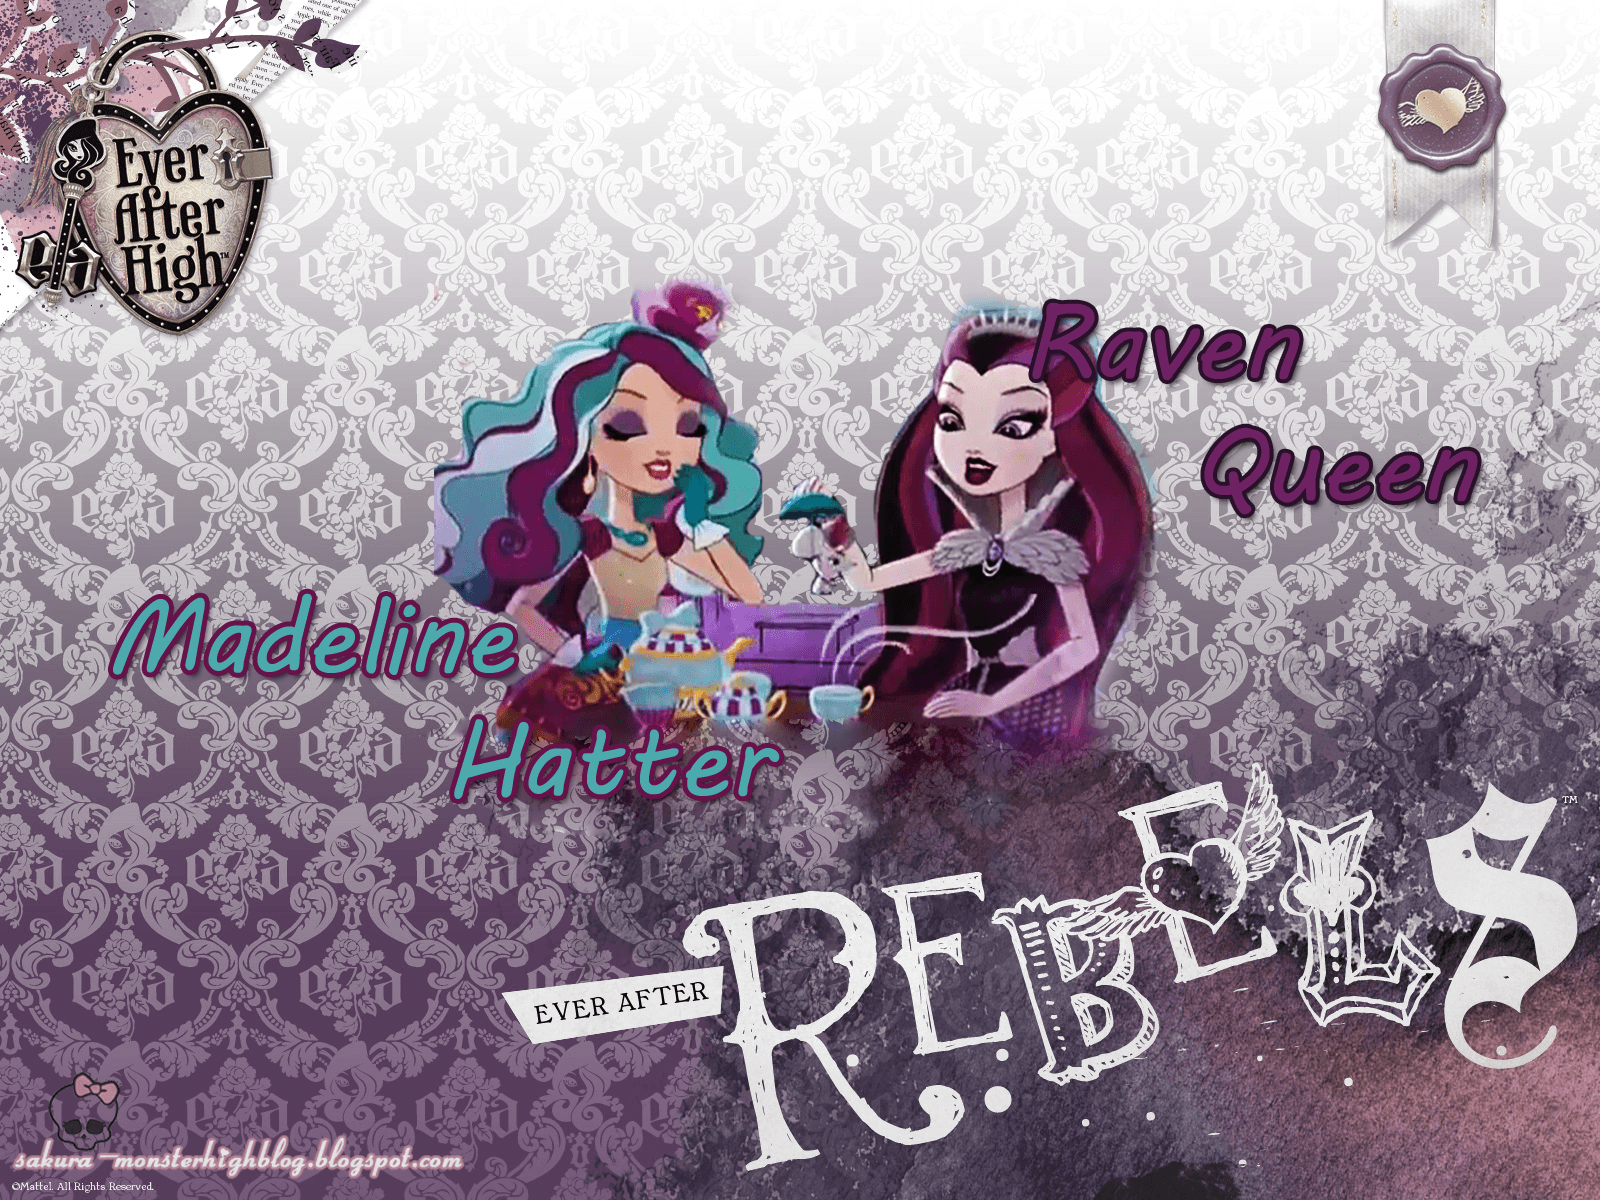 63 Ever After High Photos and Wallpaper ideas  ever after high ever after  monster high